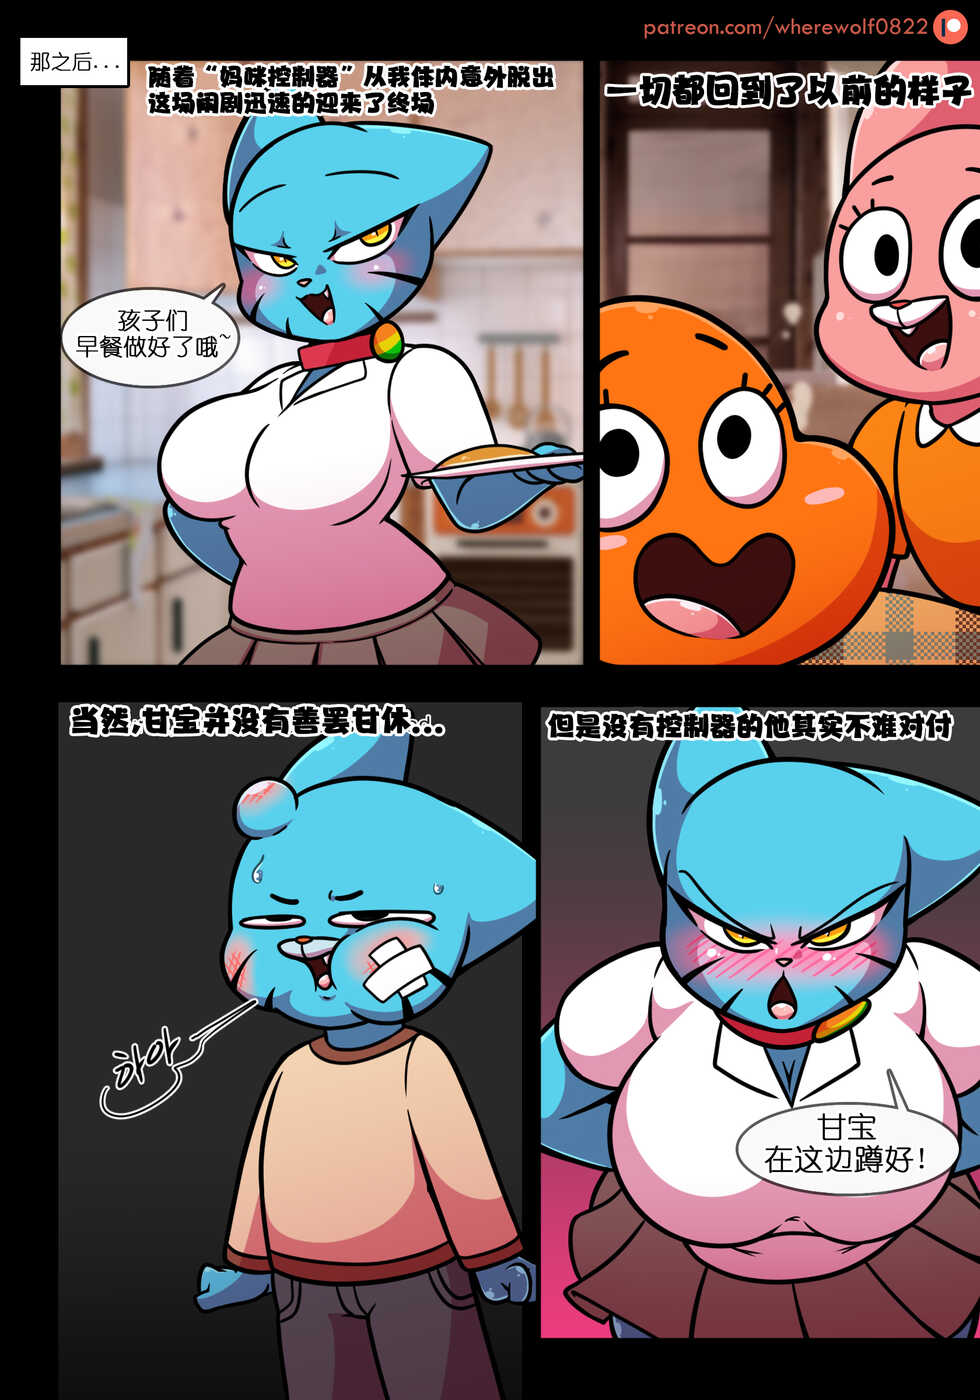 [Wherewolf] Lusty World of Nicole Ep. 5 - Controller pet [CN] - Page 28